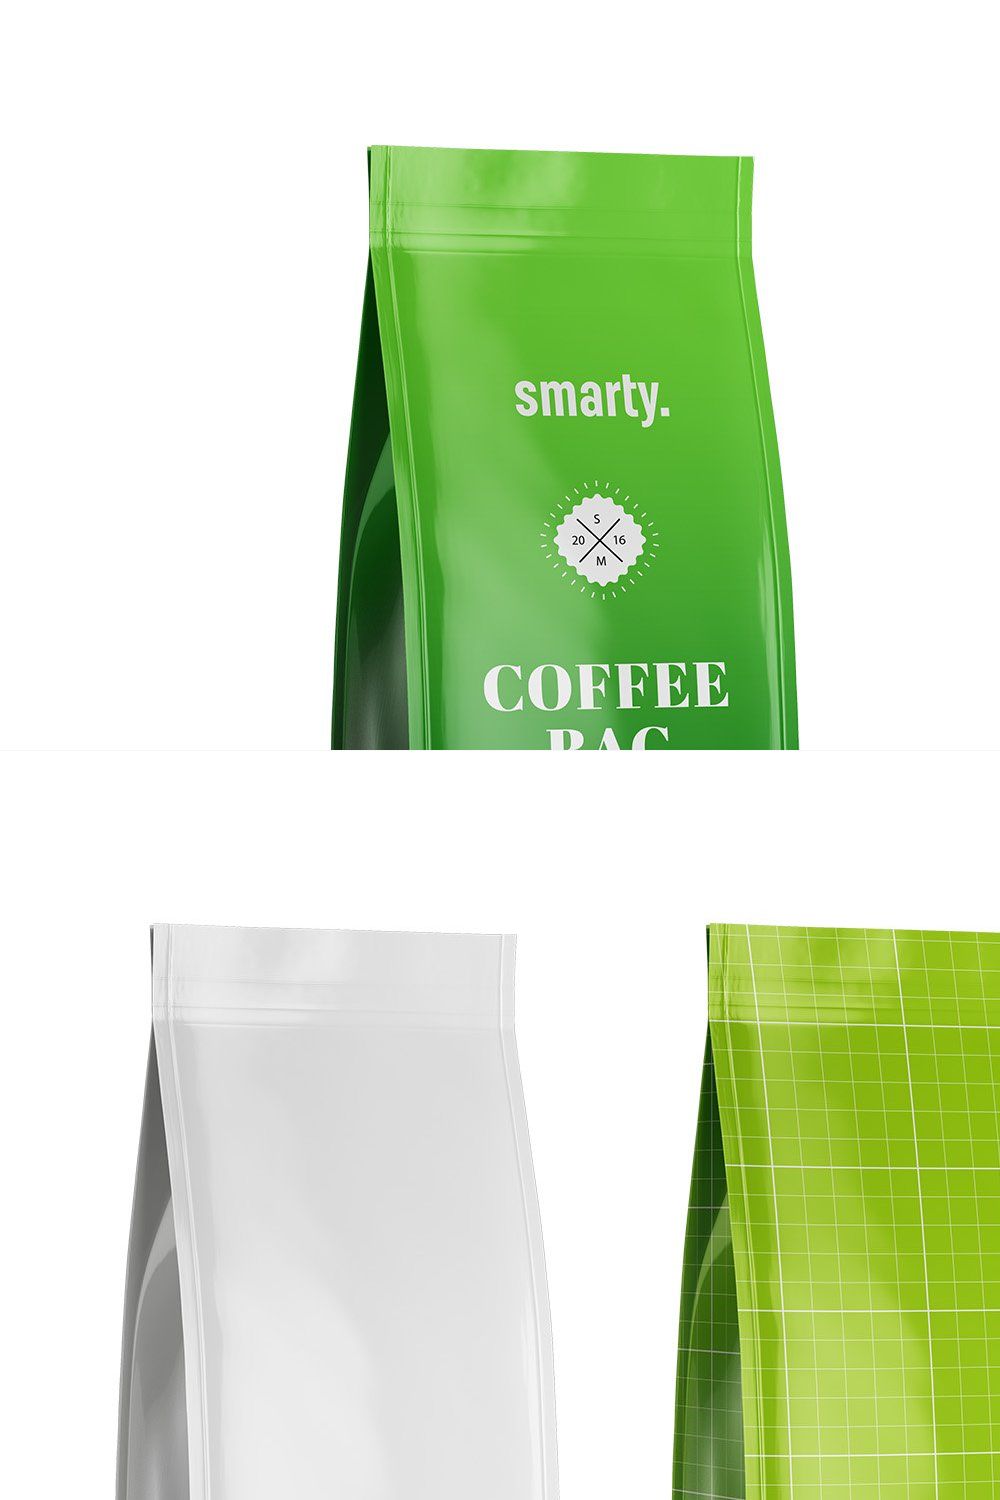 Glossy coffee bag mockup pinterest preview image.